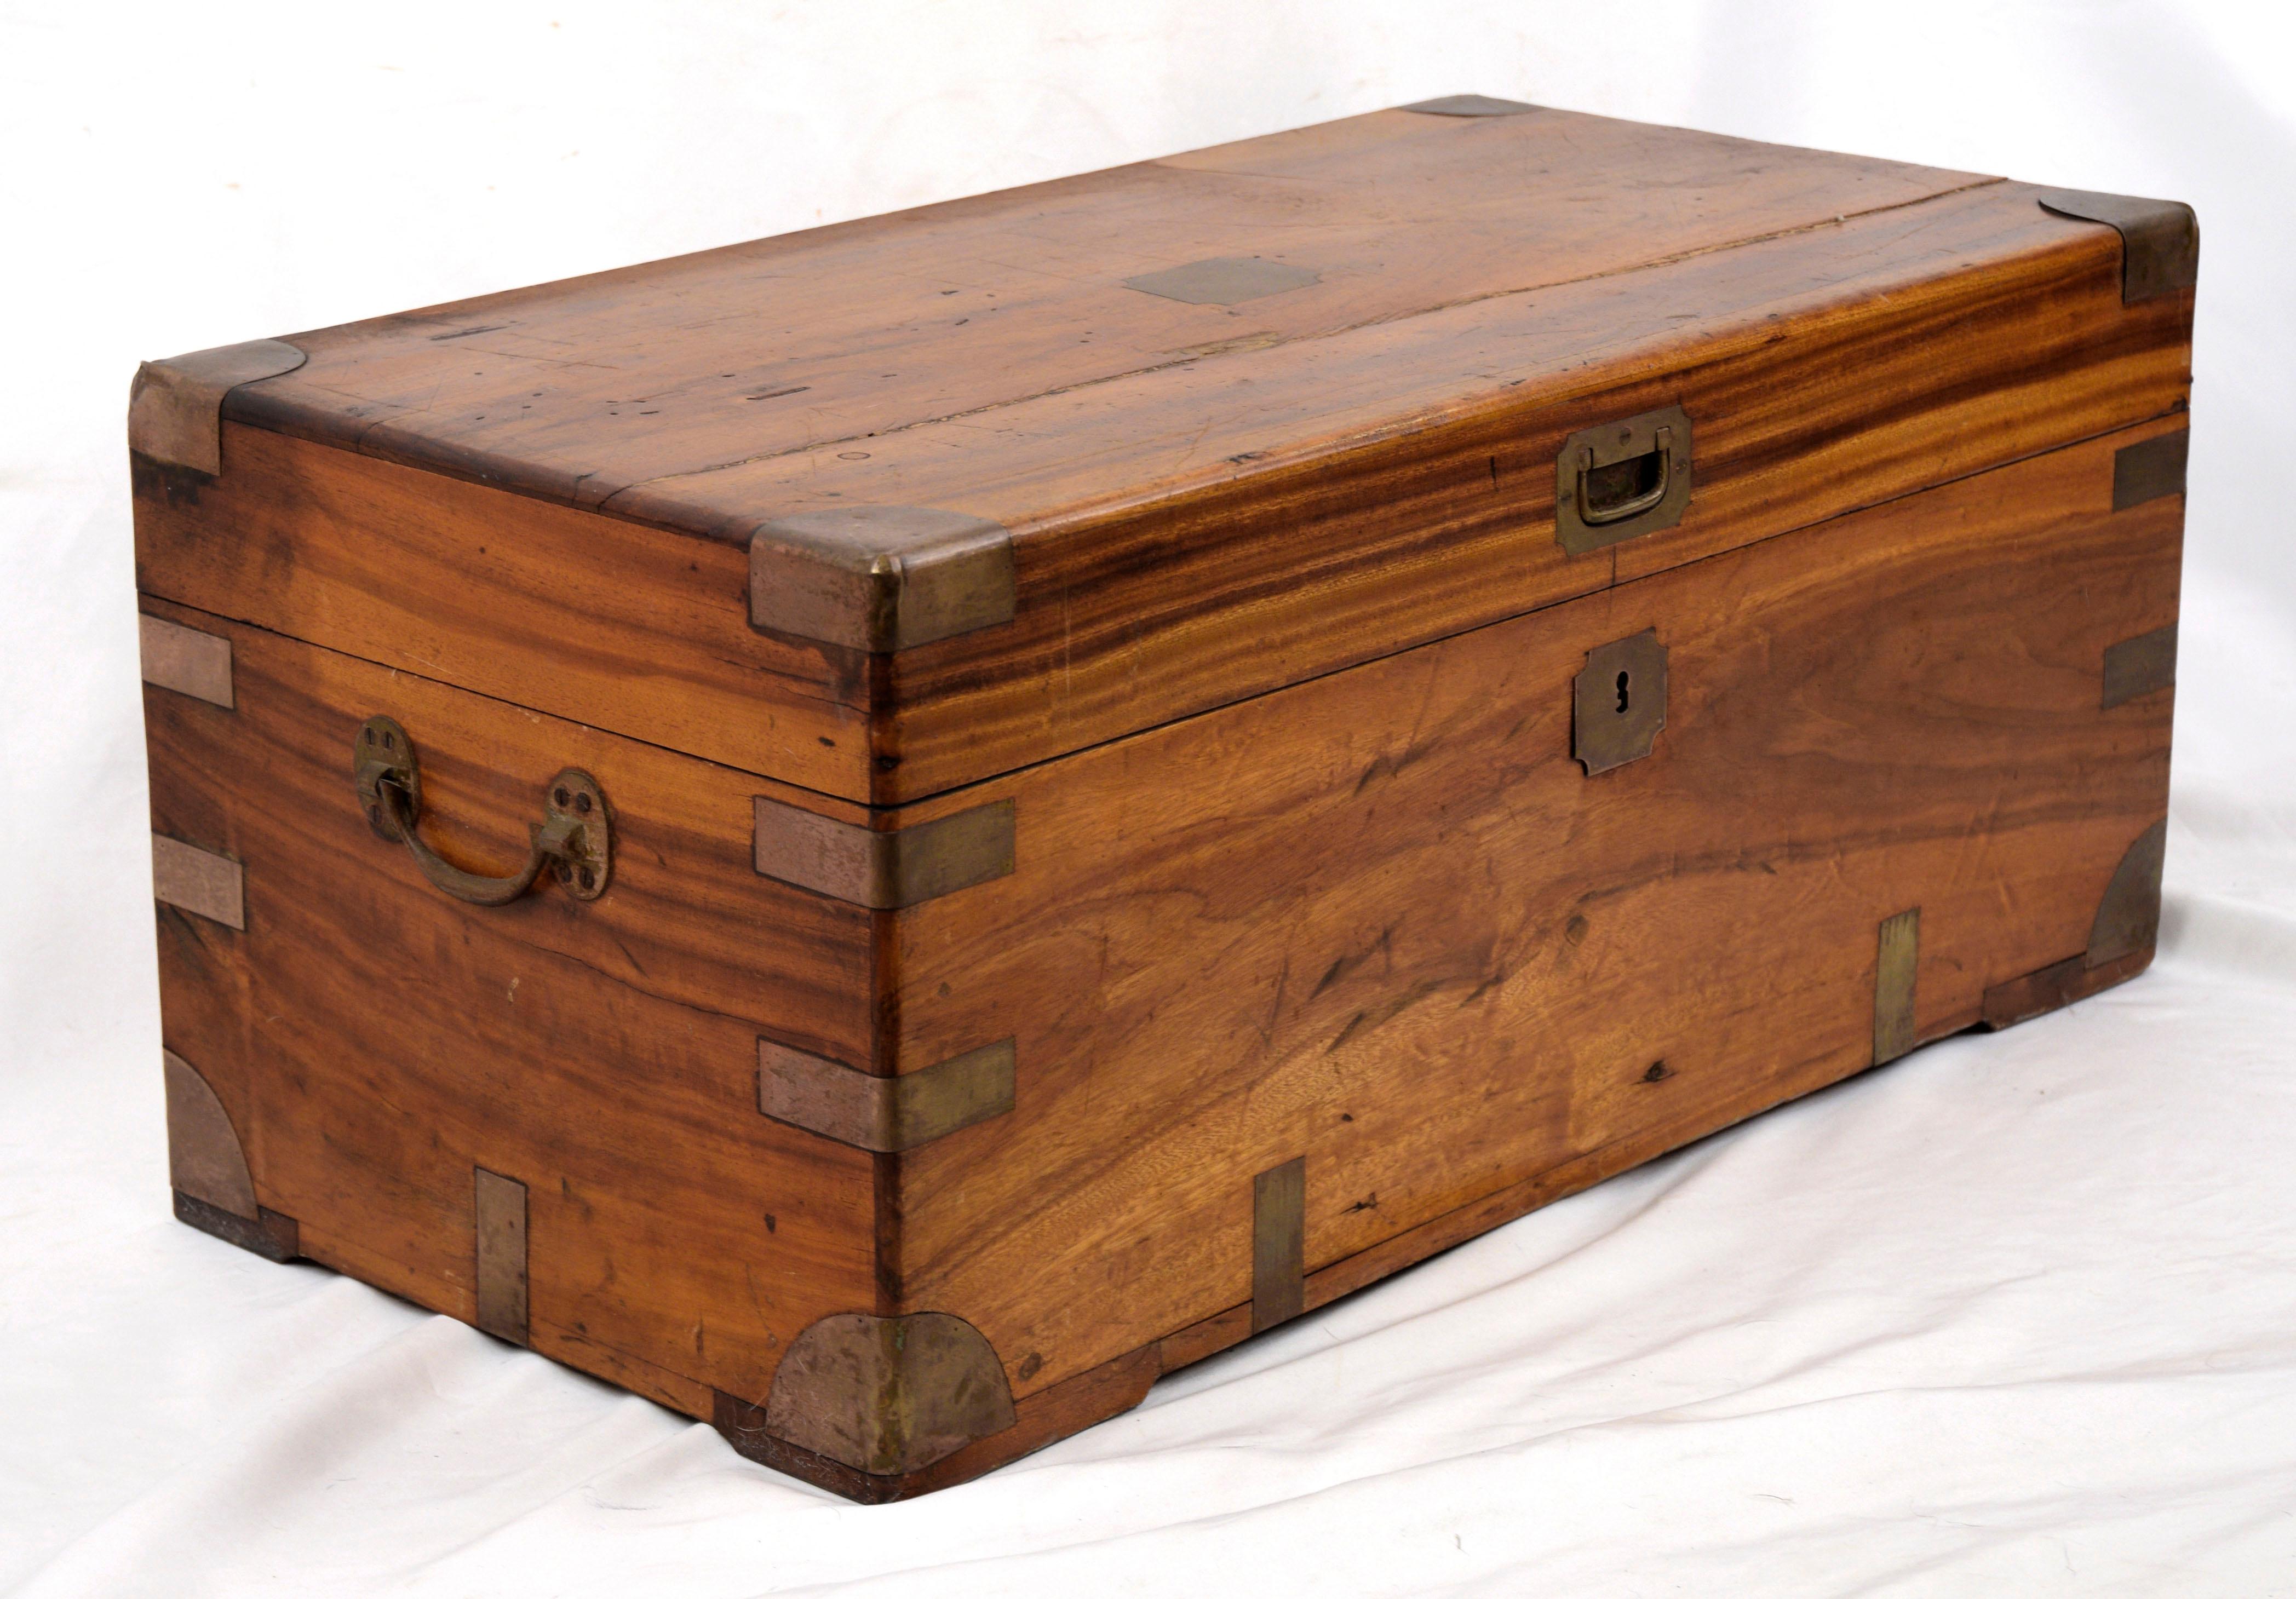 Camphorwood Campaign Chest - Late 19th Century Chinese Export Case (Medium)

This hardwood chest has brass hardware, including handles. It has a plaque on the top that would have been inscribed with the owner's name, but this one has not been used.